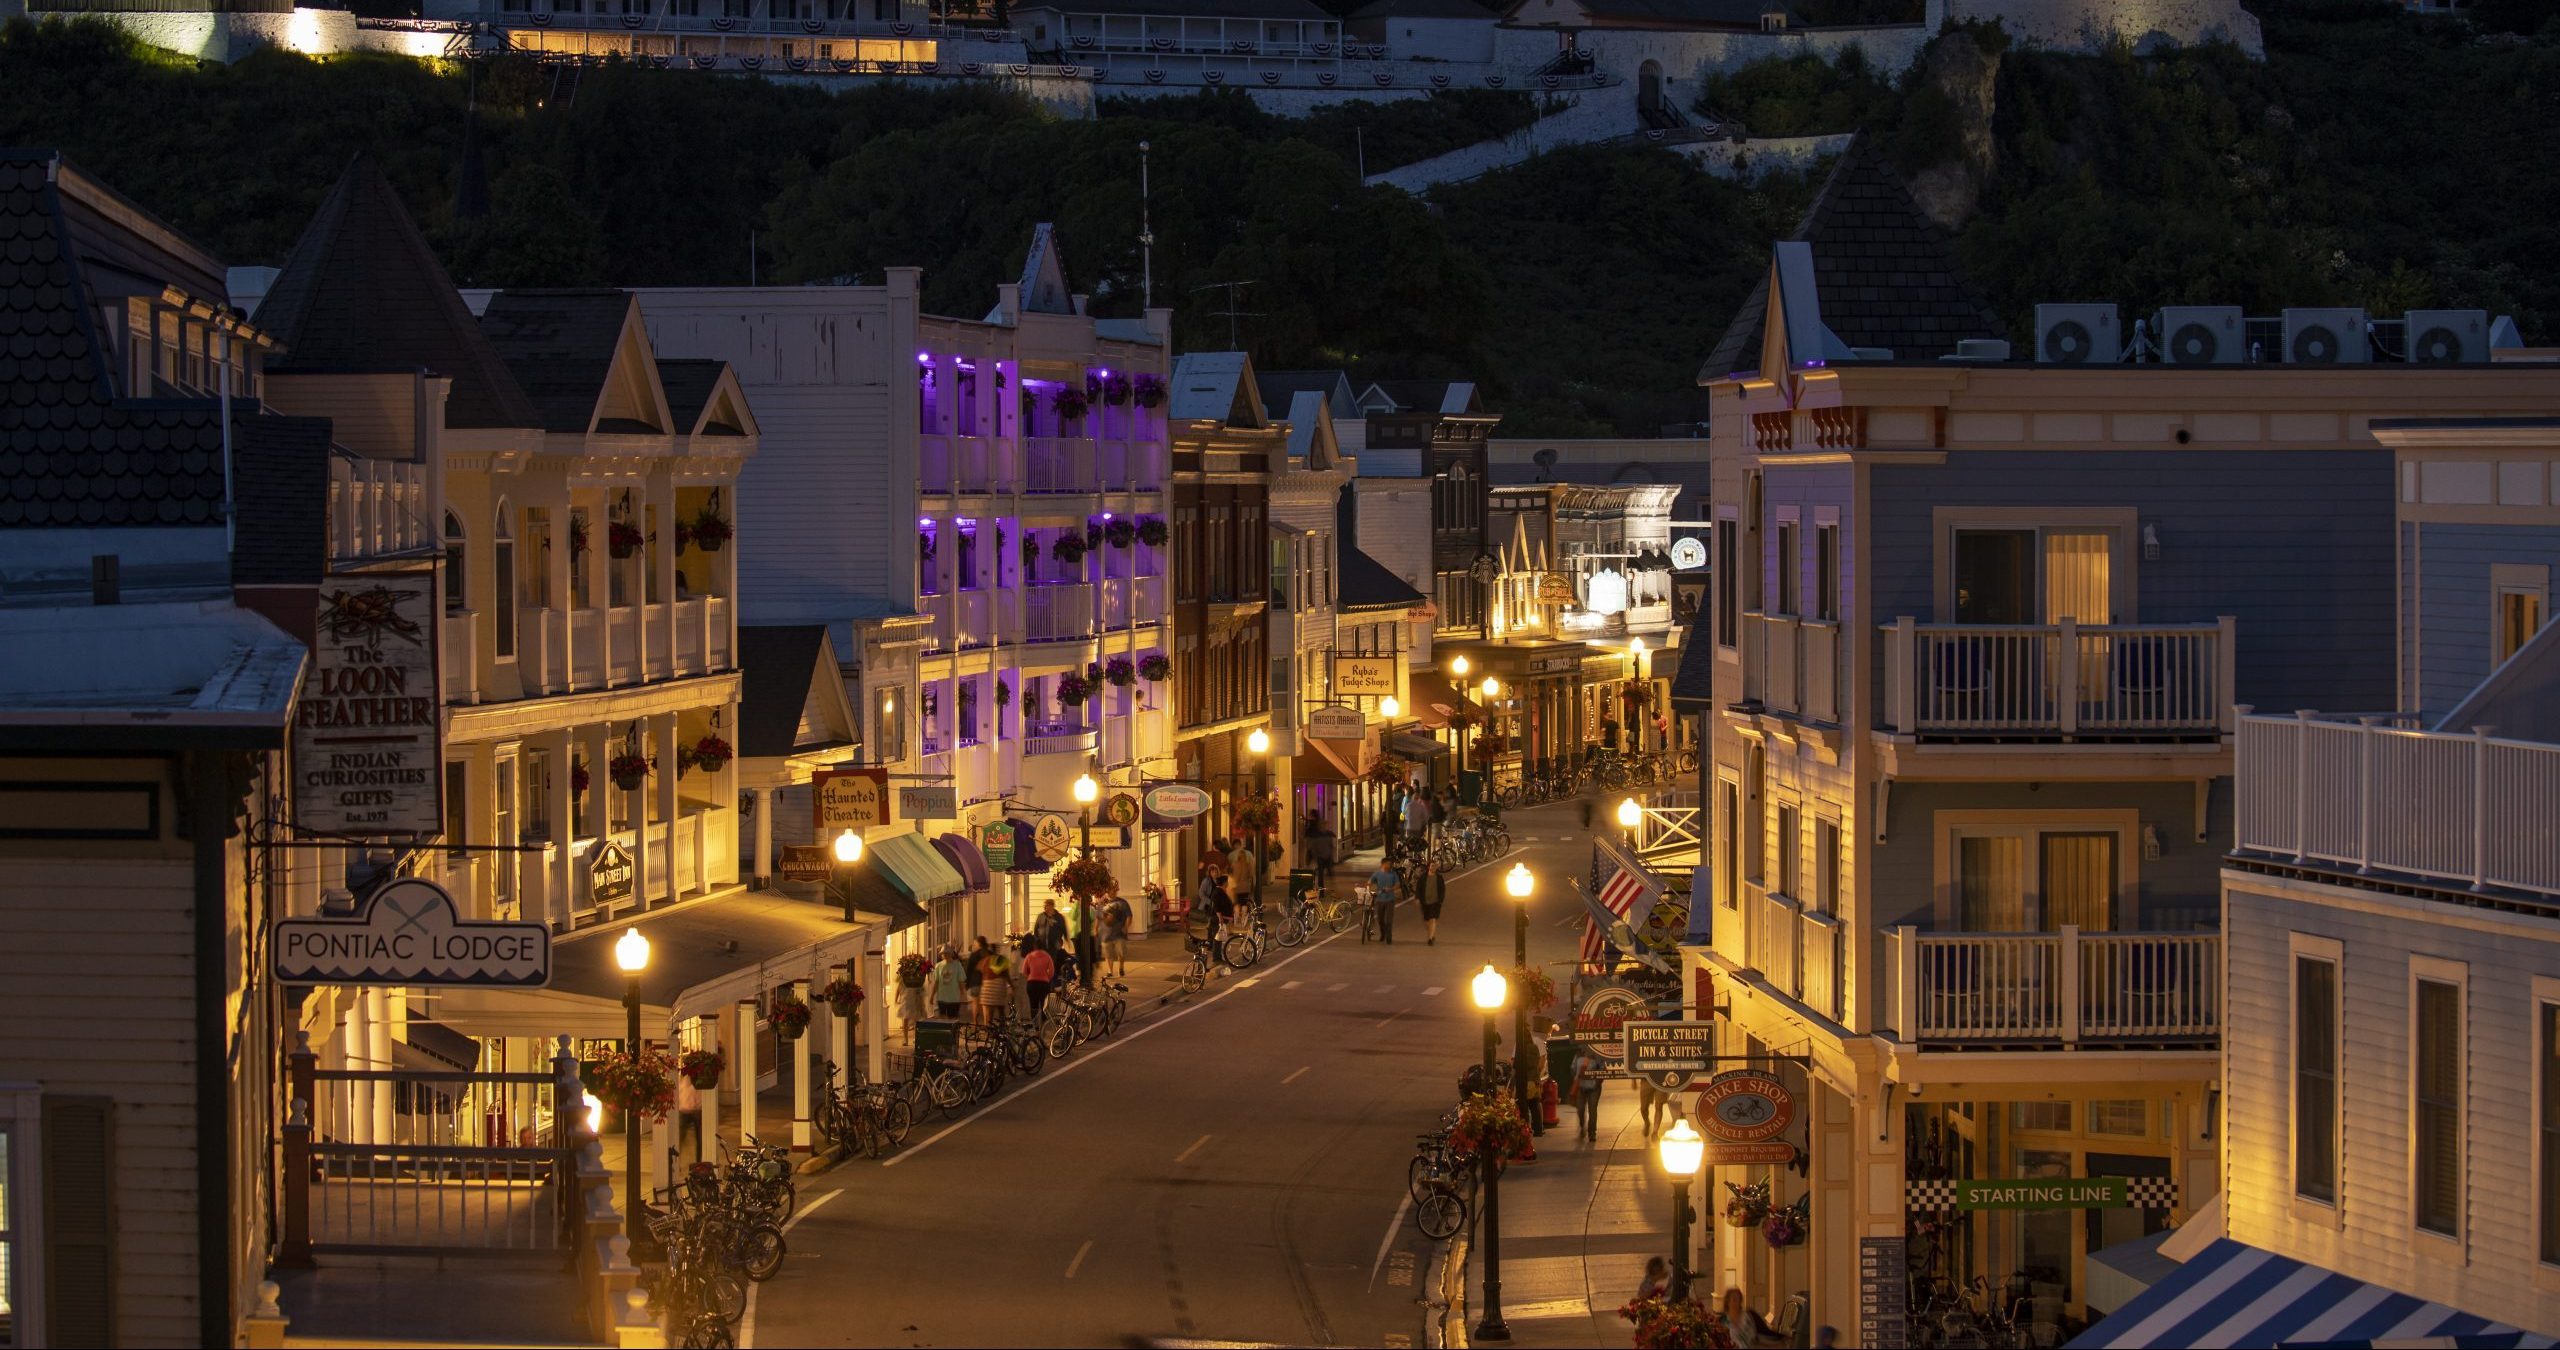 Spending the night on Mackinac Island gives you the chance to experience of the fun of downtown nightlife after dark.